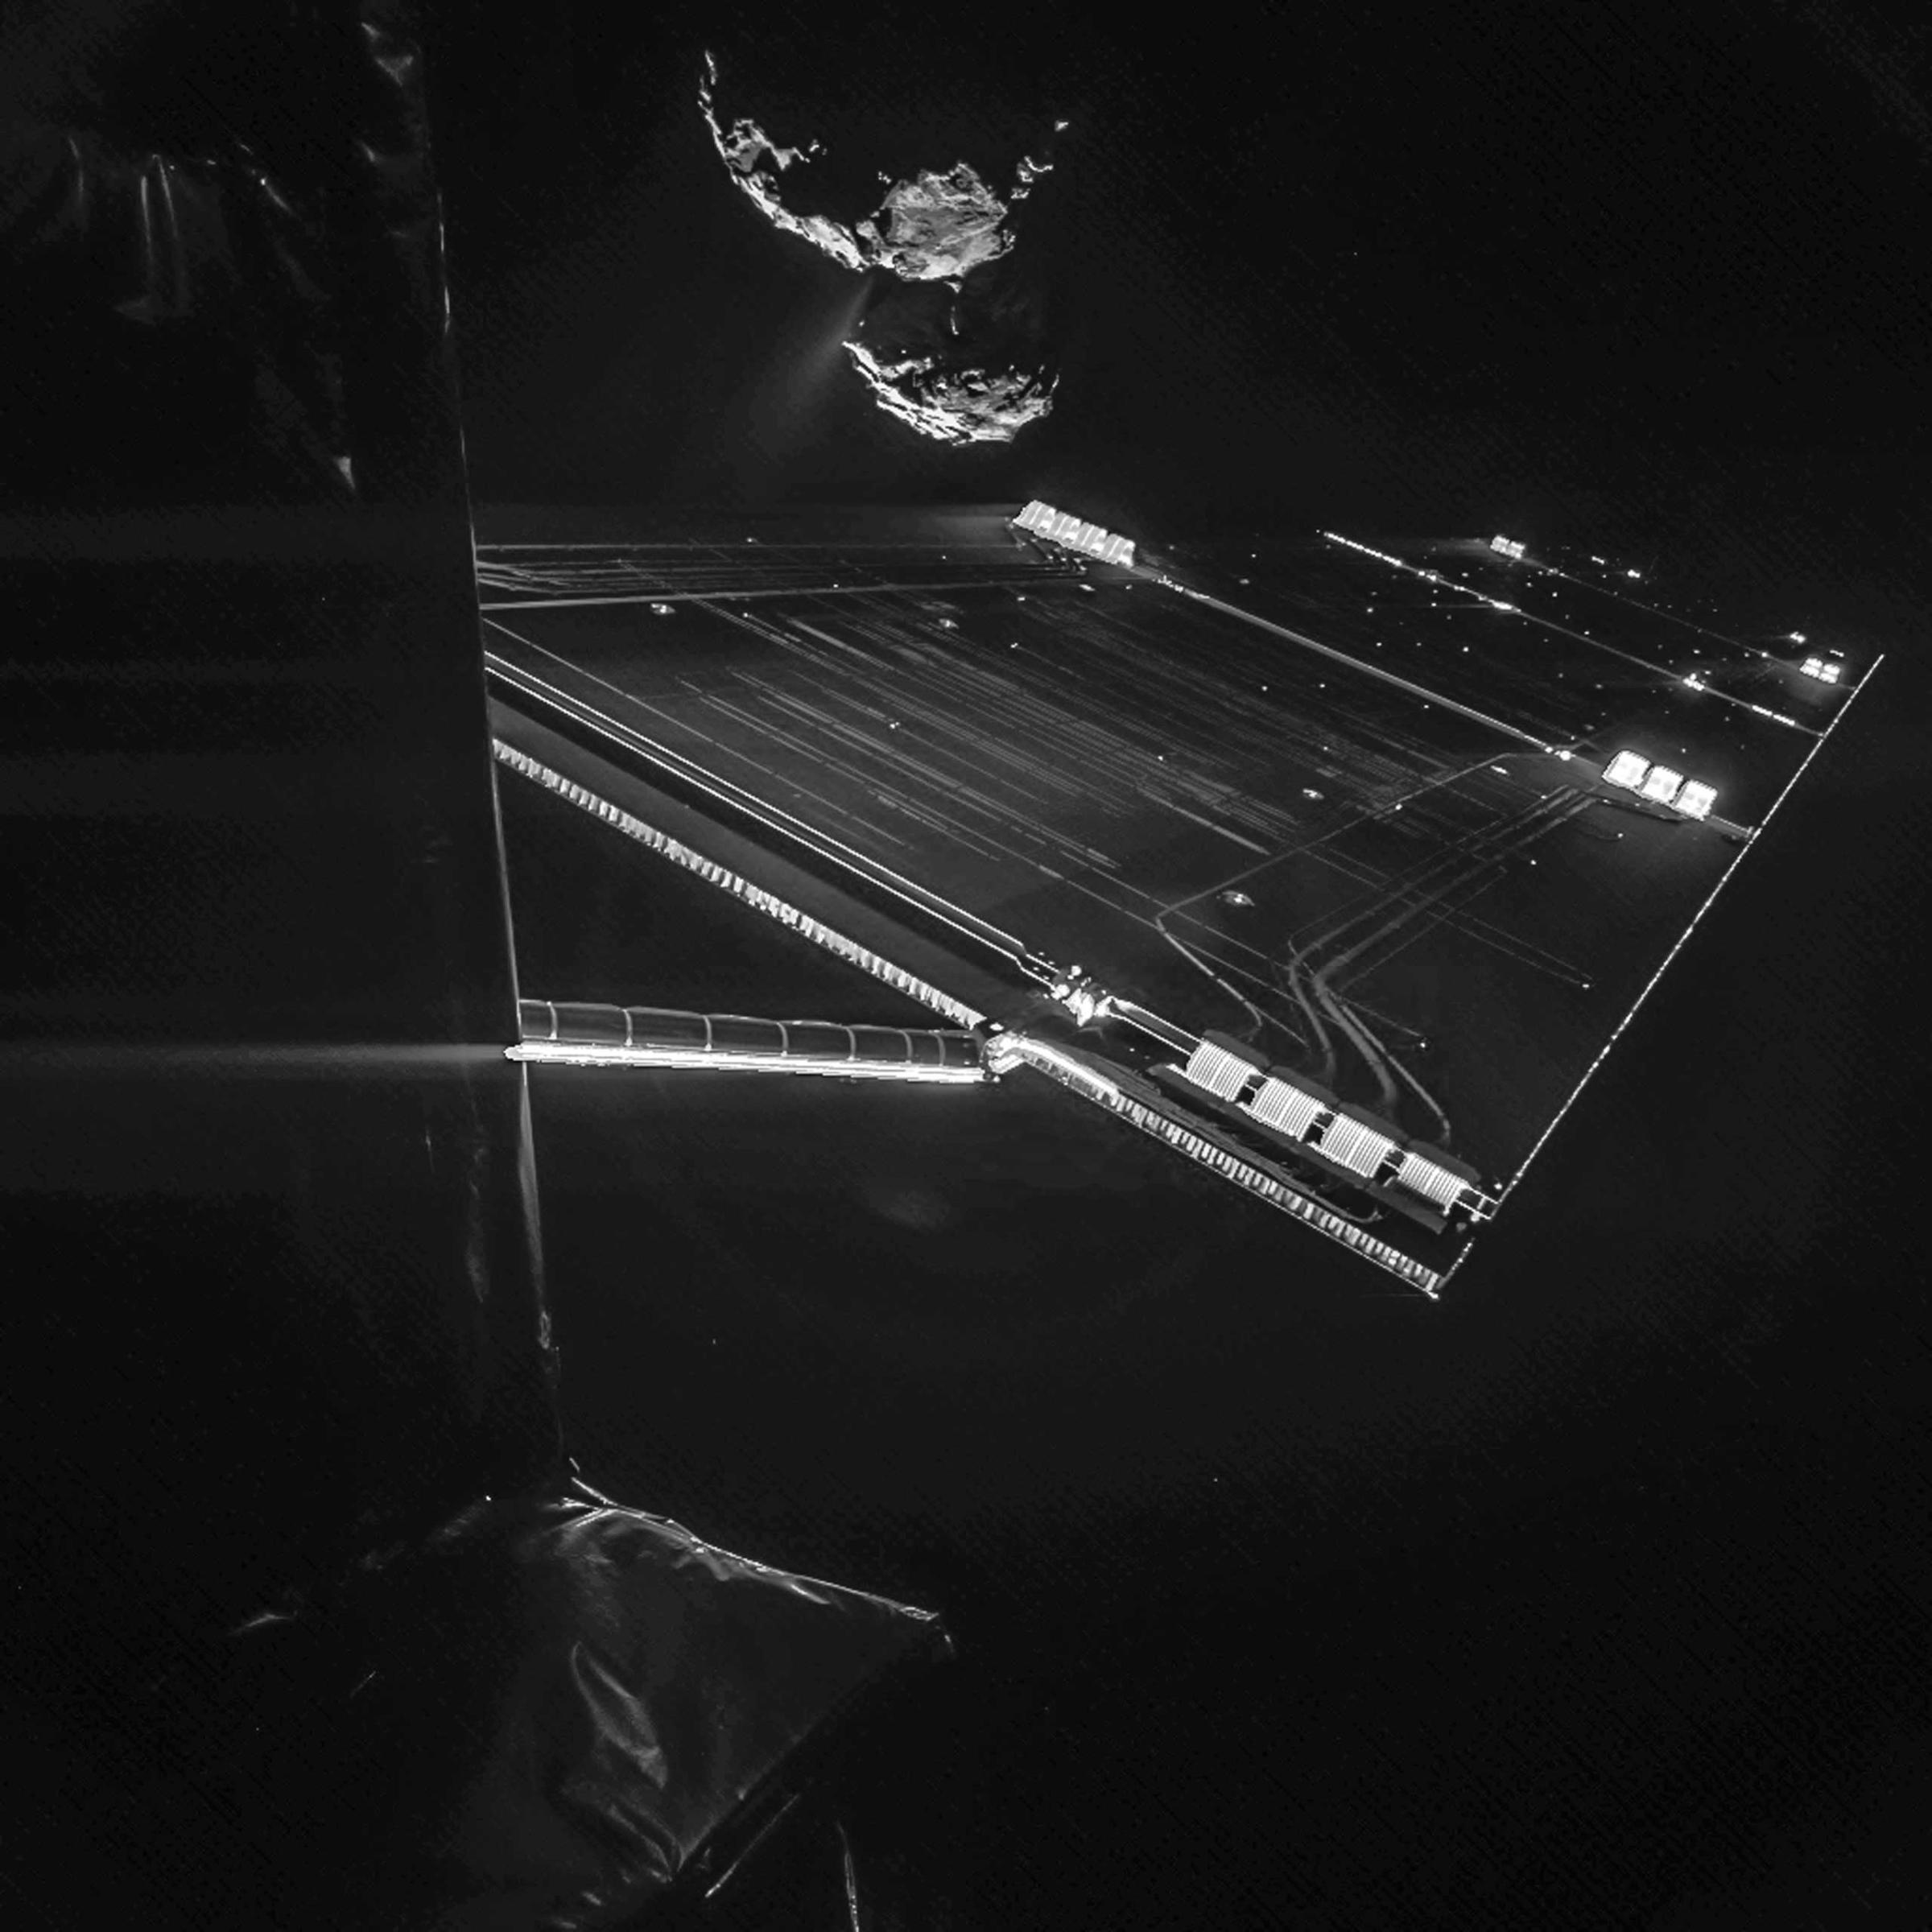 Using the CIVA camera on Rosetta’s Philae lander the spacecraft snapped a ‘selfie’ with a comet passing by in the background in this photo released on Oct. 14, 2014.